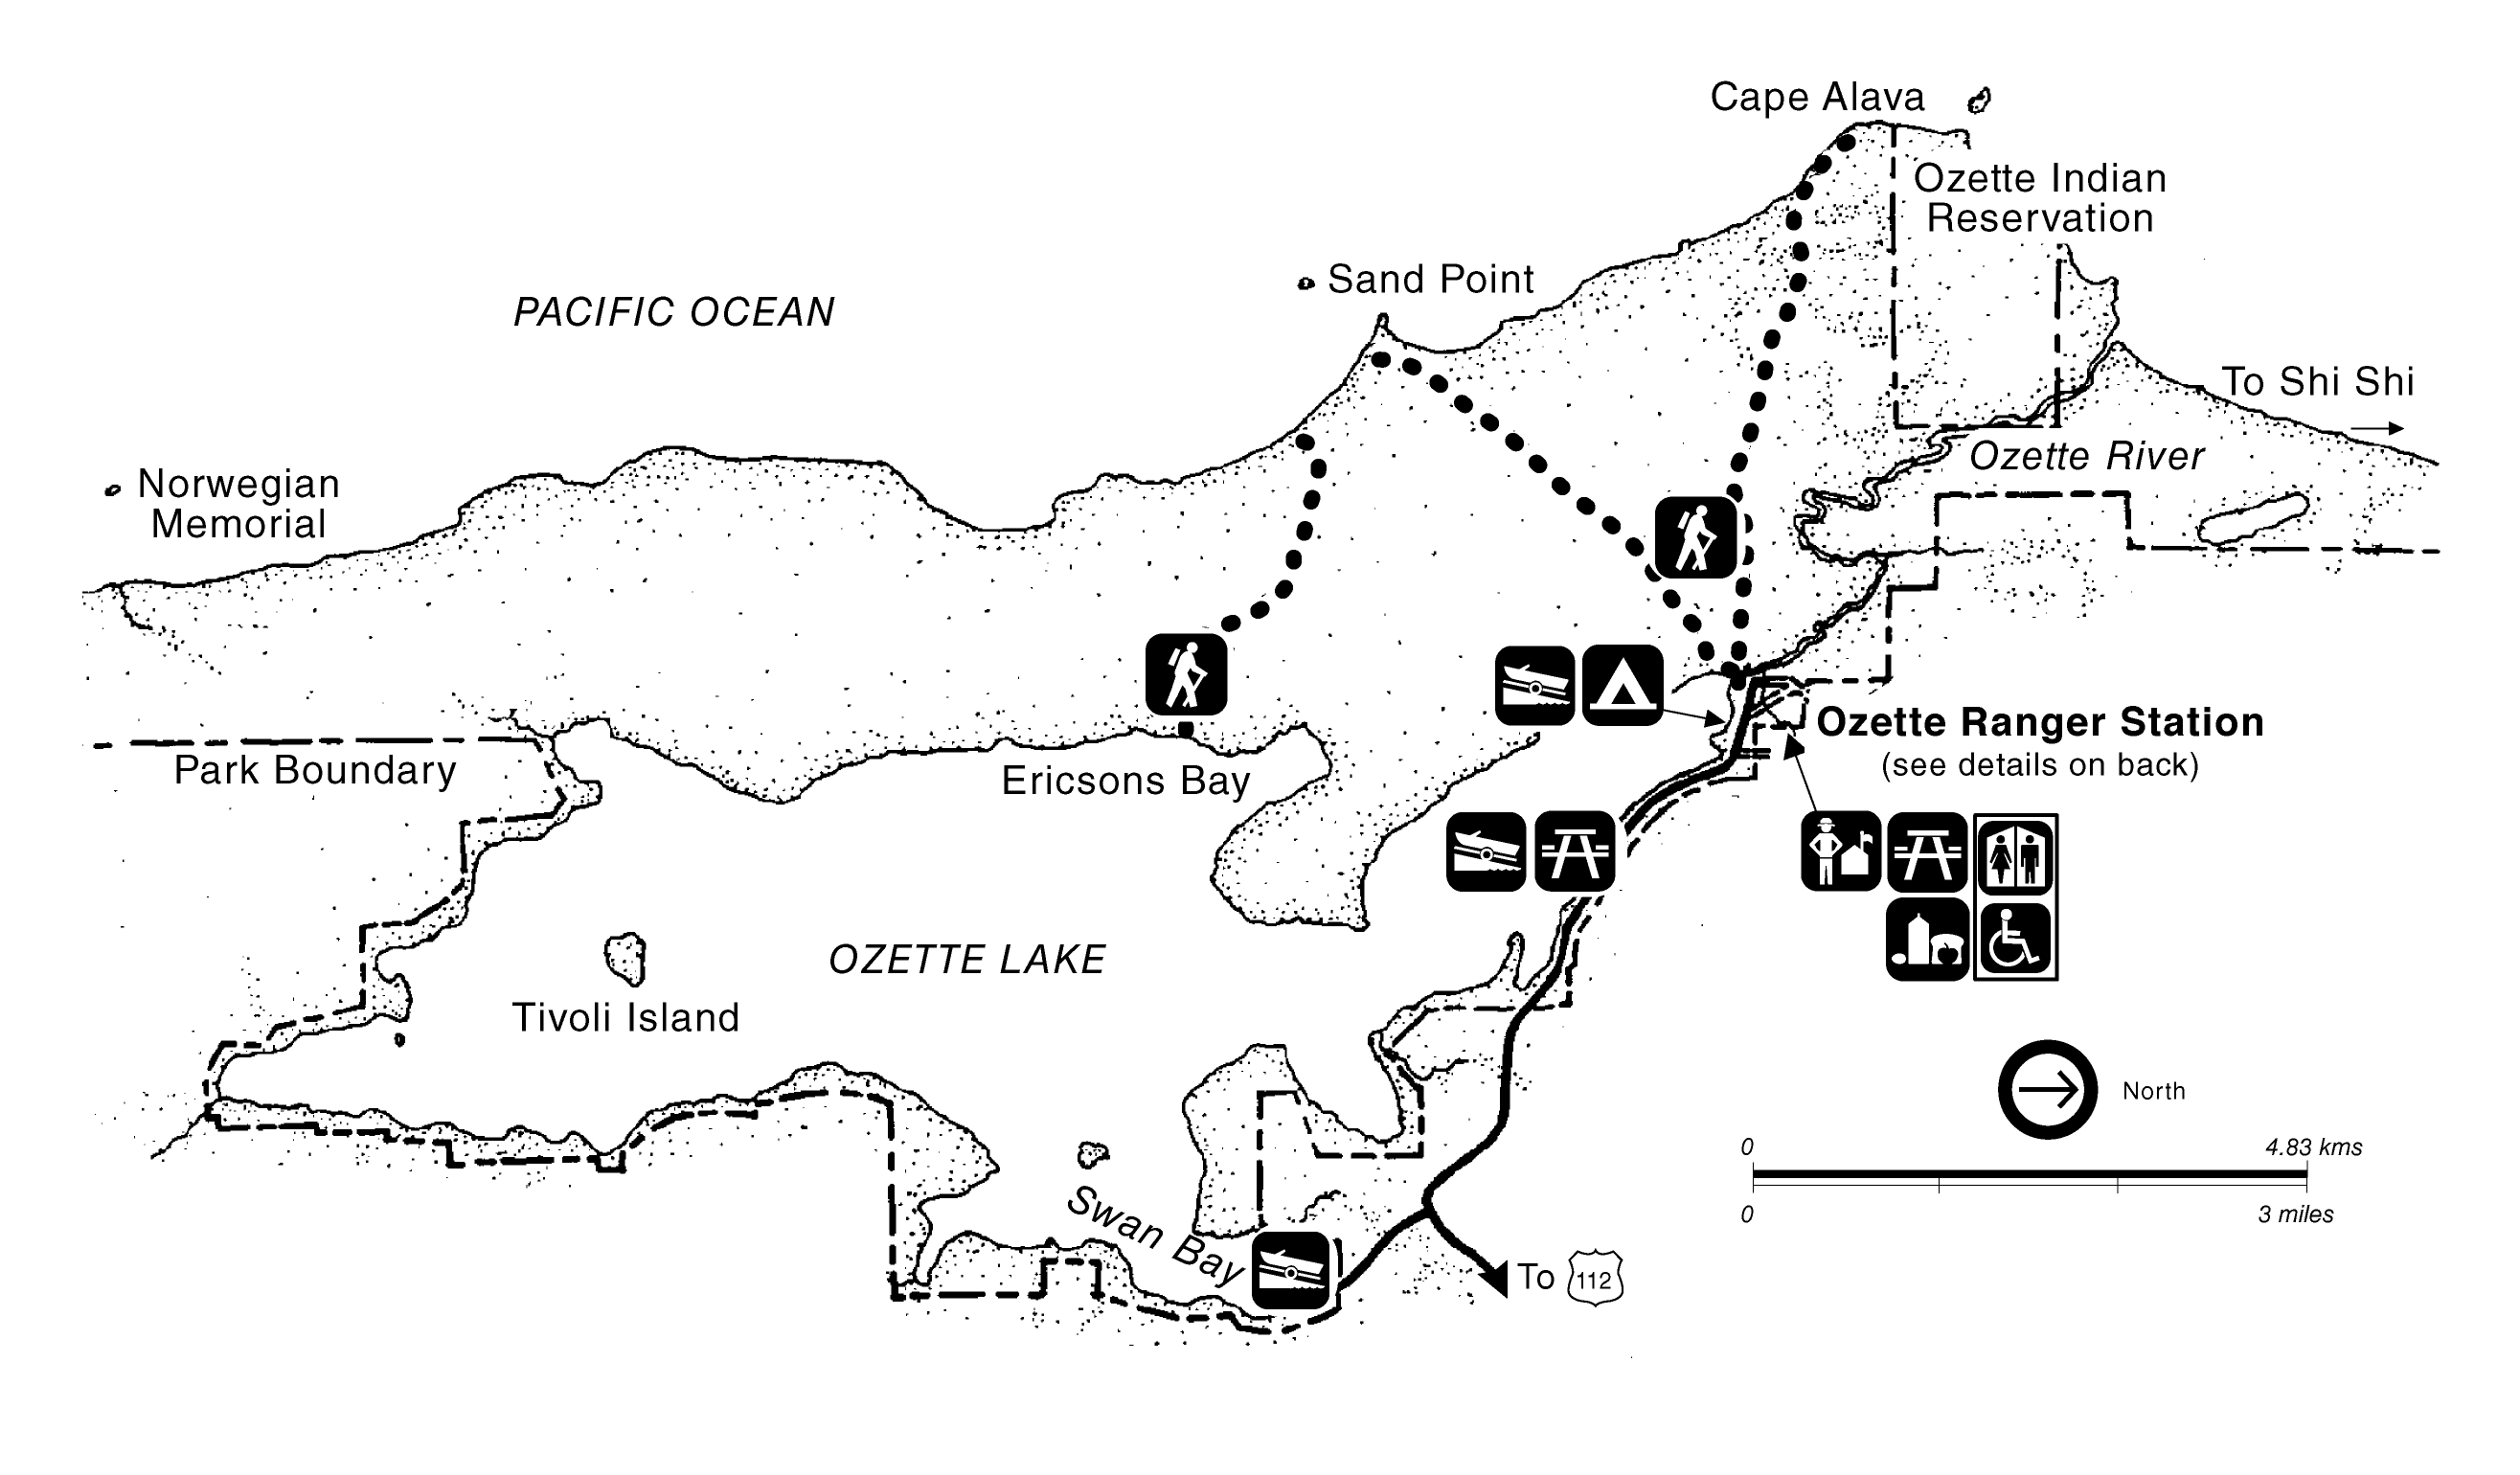 A map of the Lake Ozette area including Lake Ozette, roads, hiking trails, the Pacific Ocean, boat launches, a camping area, Olympic National Park Boundaries, Ozette Indian Reservation boundaries, and Ozette Ranger Station.